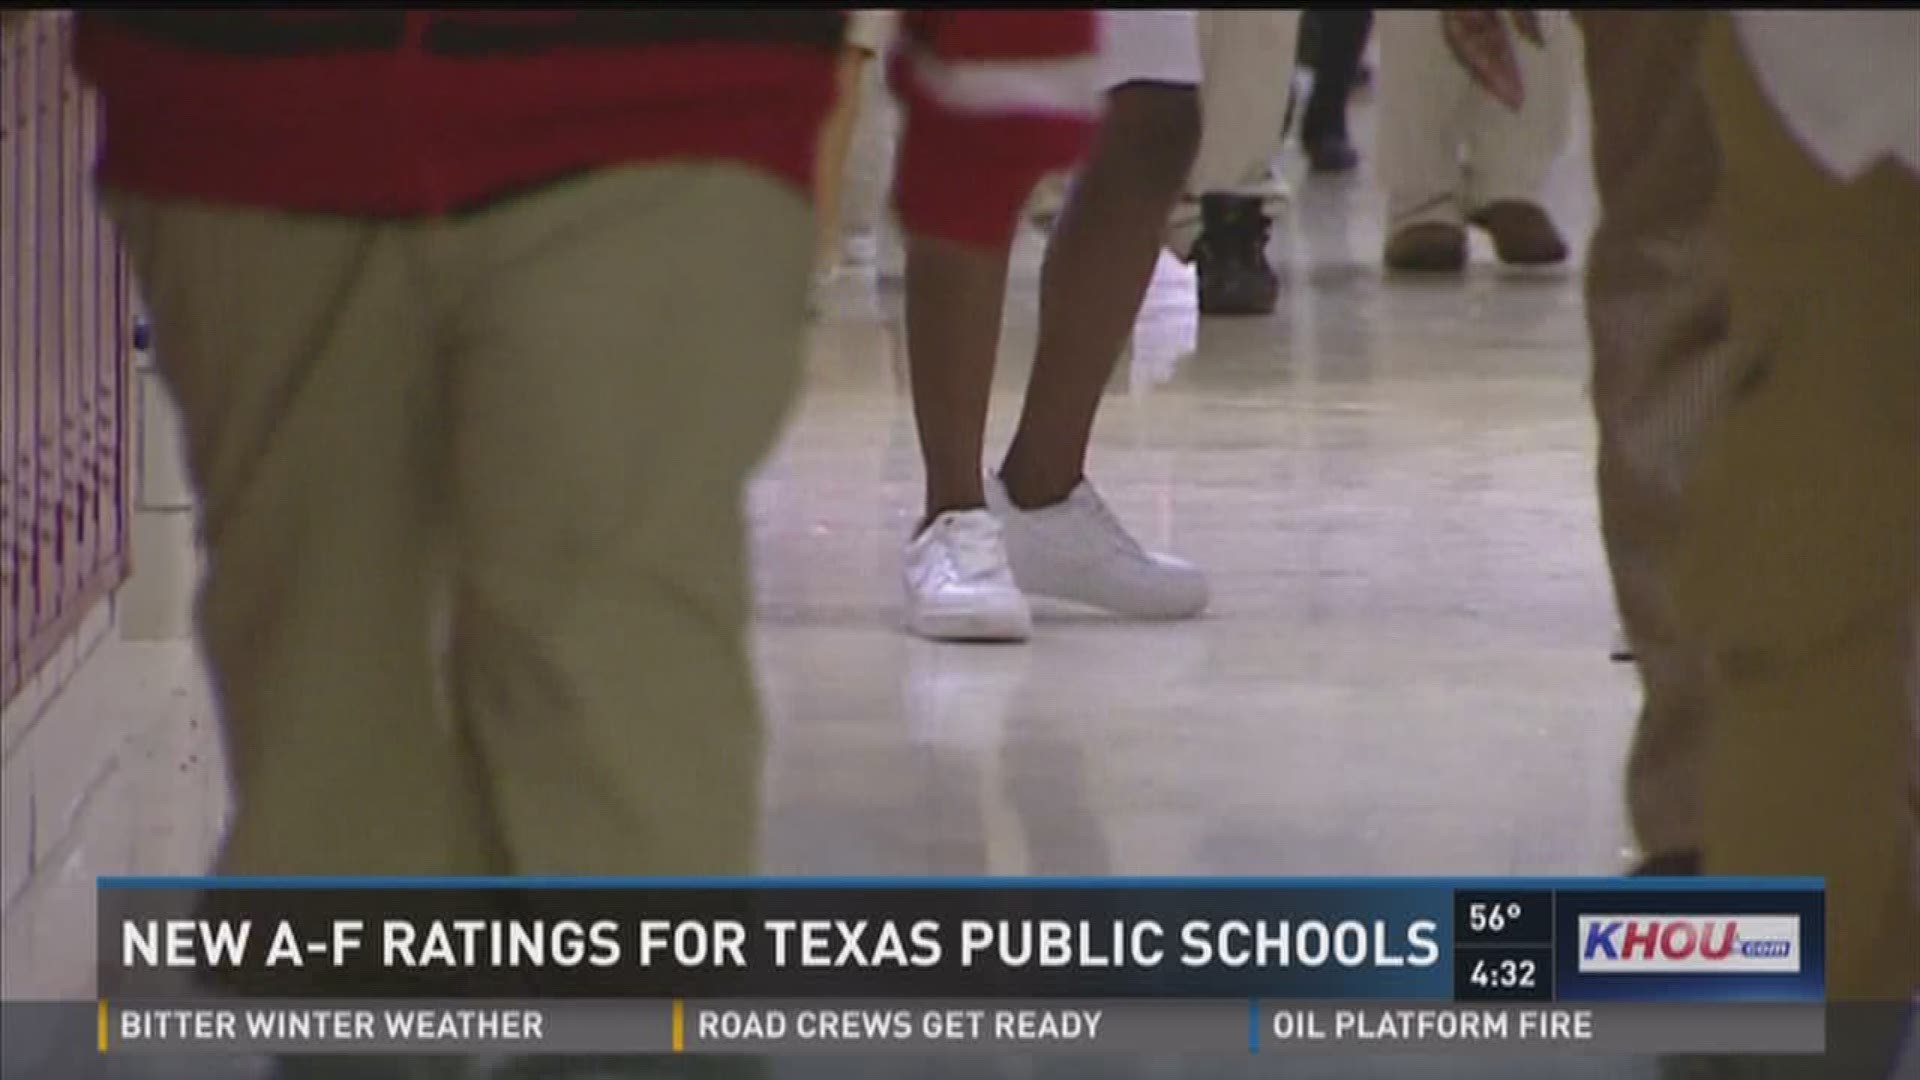 For the first time, Texas public schools will be graded based on an A-F system.